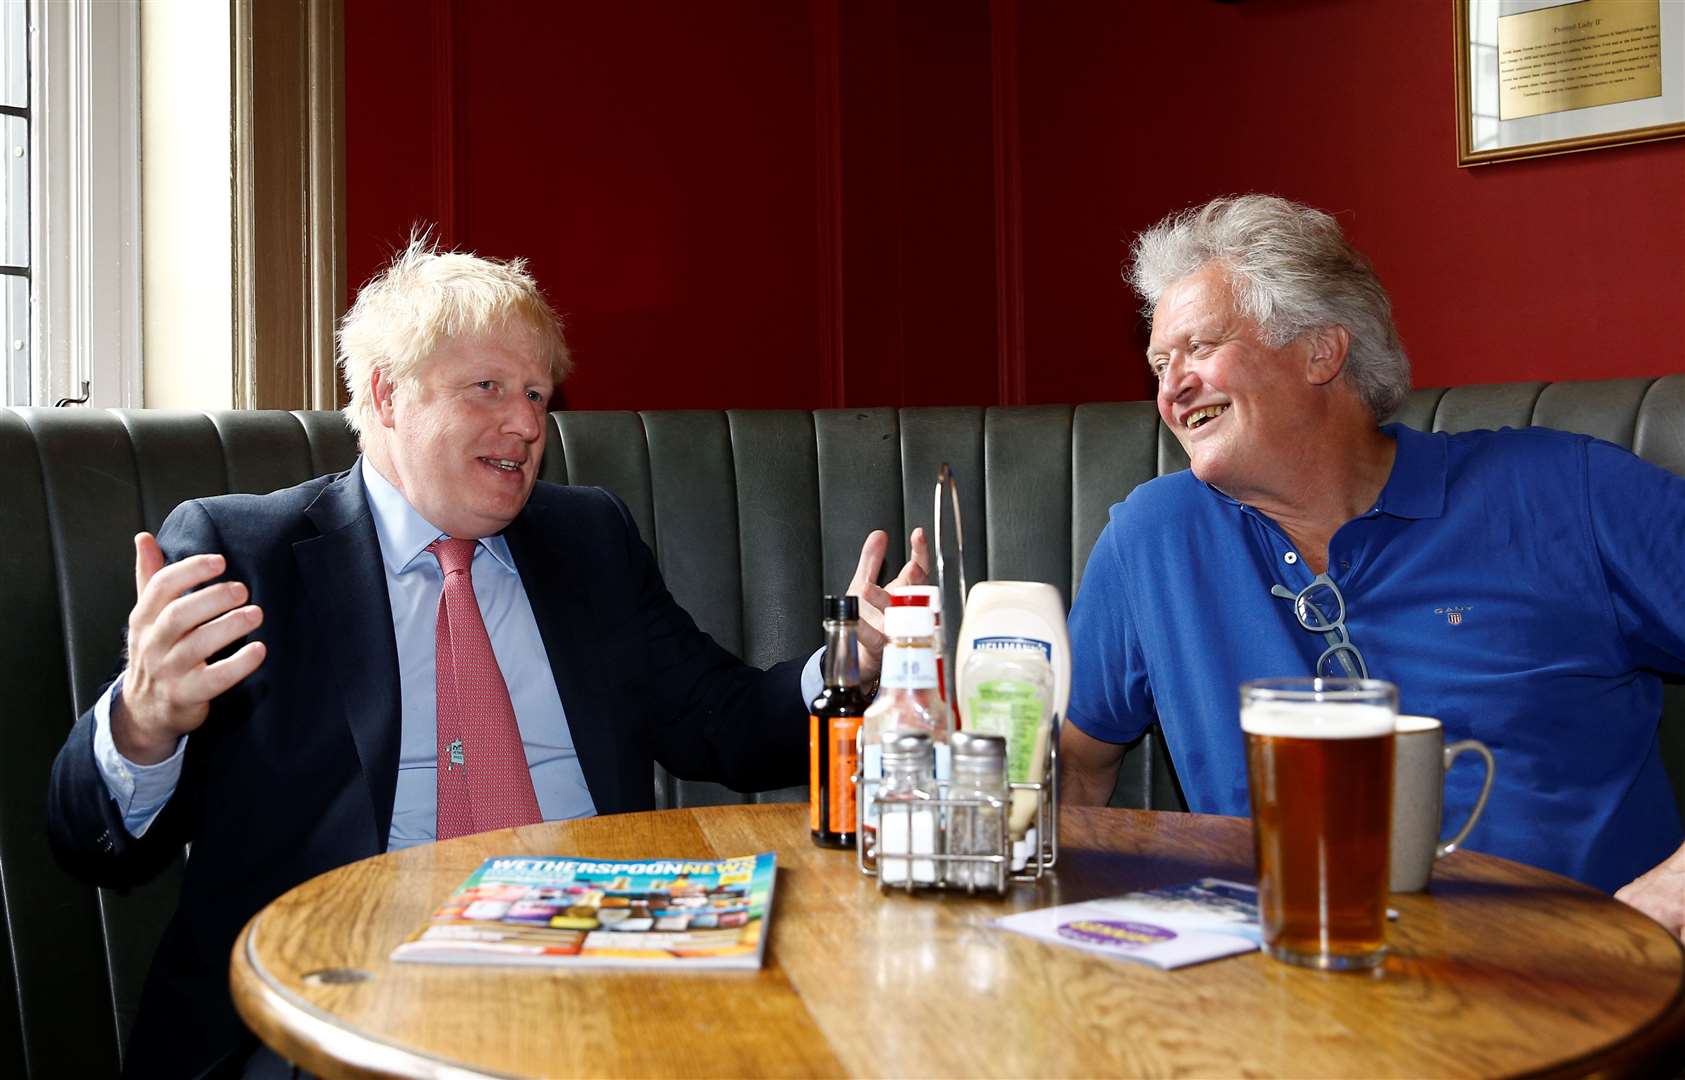 Tim Martin (right) in happier times, will introduce screens in pubs and remove shared condiments from tables. (Henry Nicholls / PA)